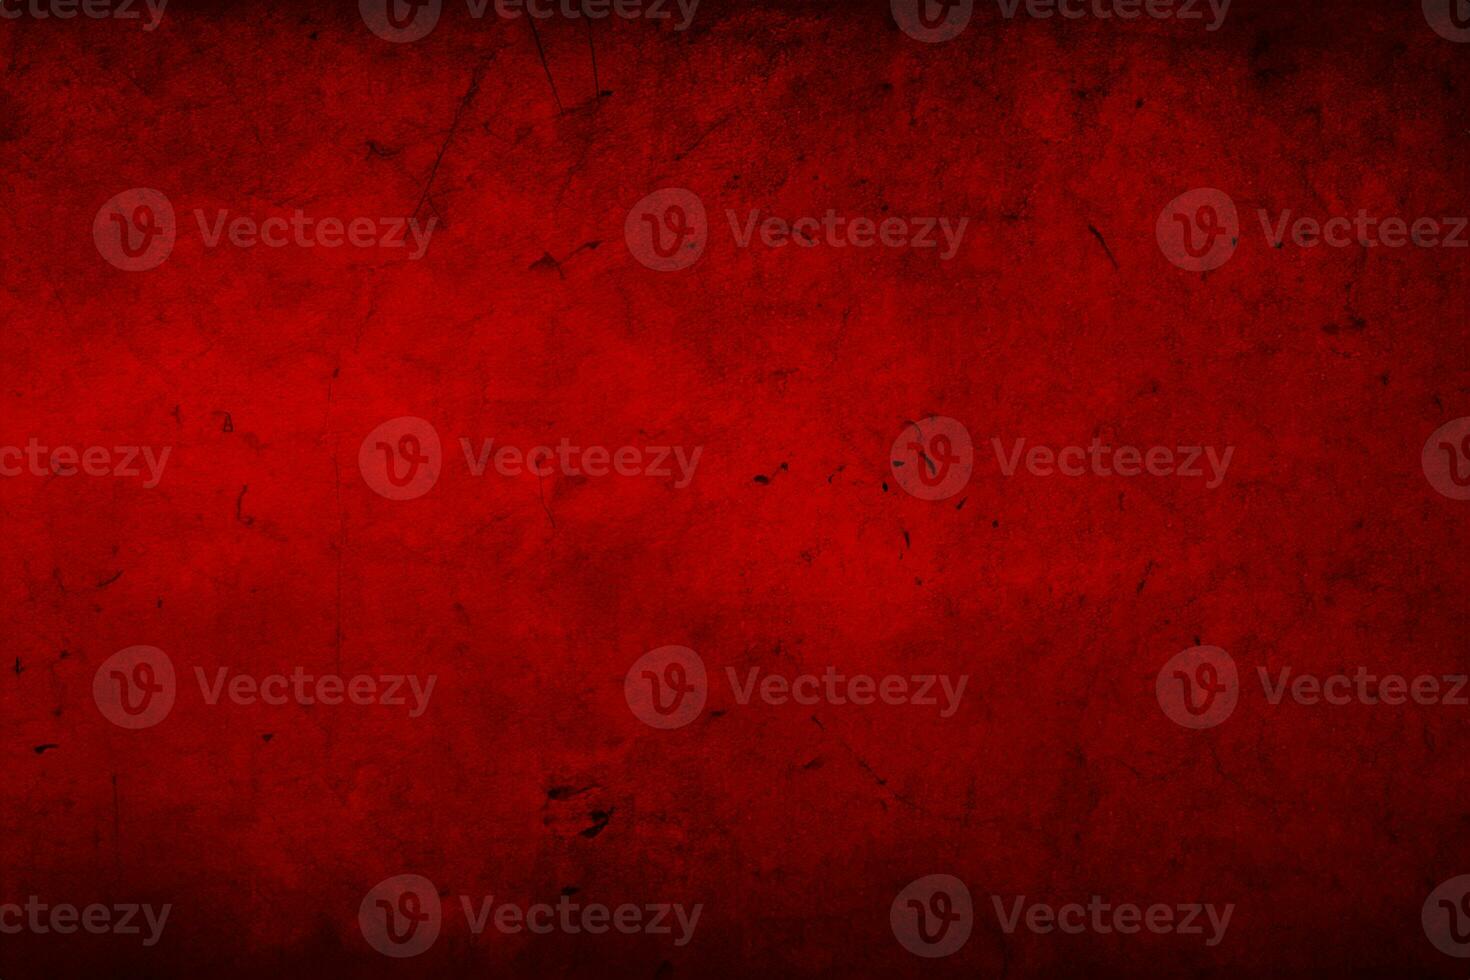 Red textured Christmas background photo